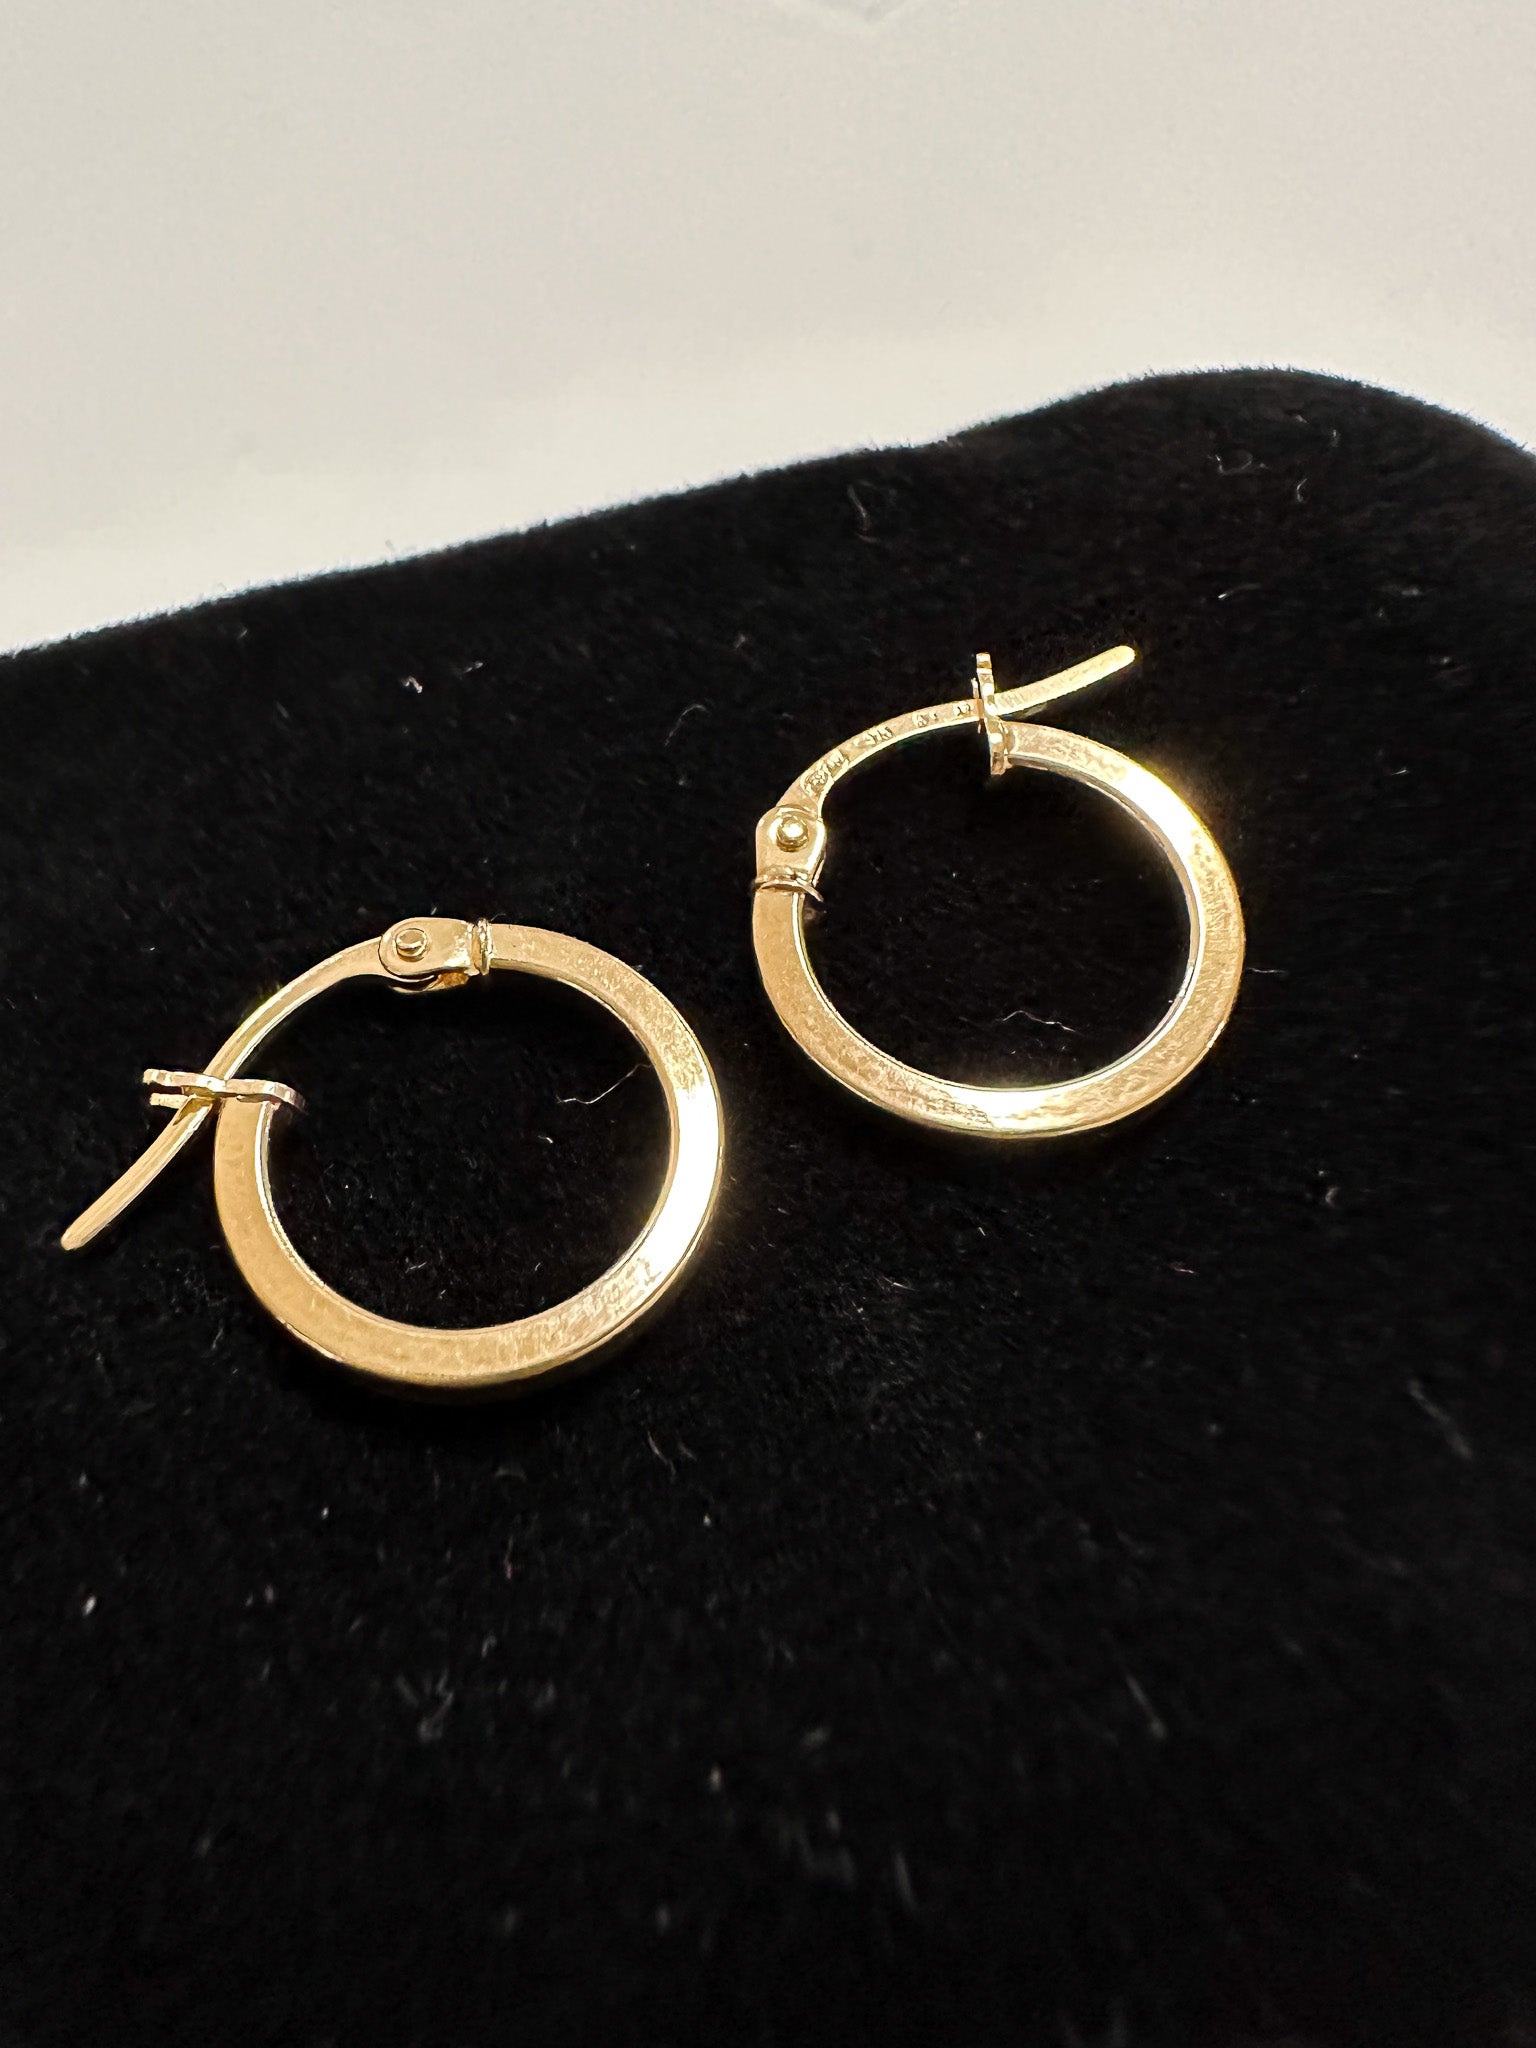 LORNE 9ct Yellow Gold 10mm Hoop Earring—a minimalist's dream of clean lines and reflective surfaces.  Features:  Precious Metal: Crafted from solid 9ct yellow gold with a prominent 375 stamp. Clean and Reflective: Chosen for its clean lines and reflective surfaces, this earring embodies minimalist elegance at its finest.